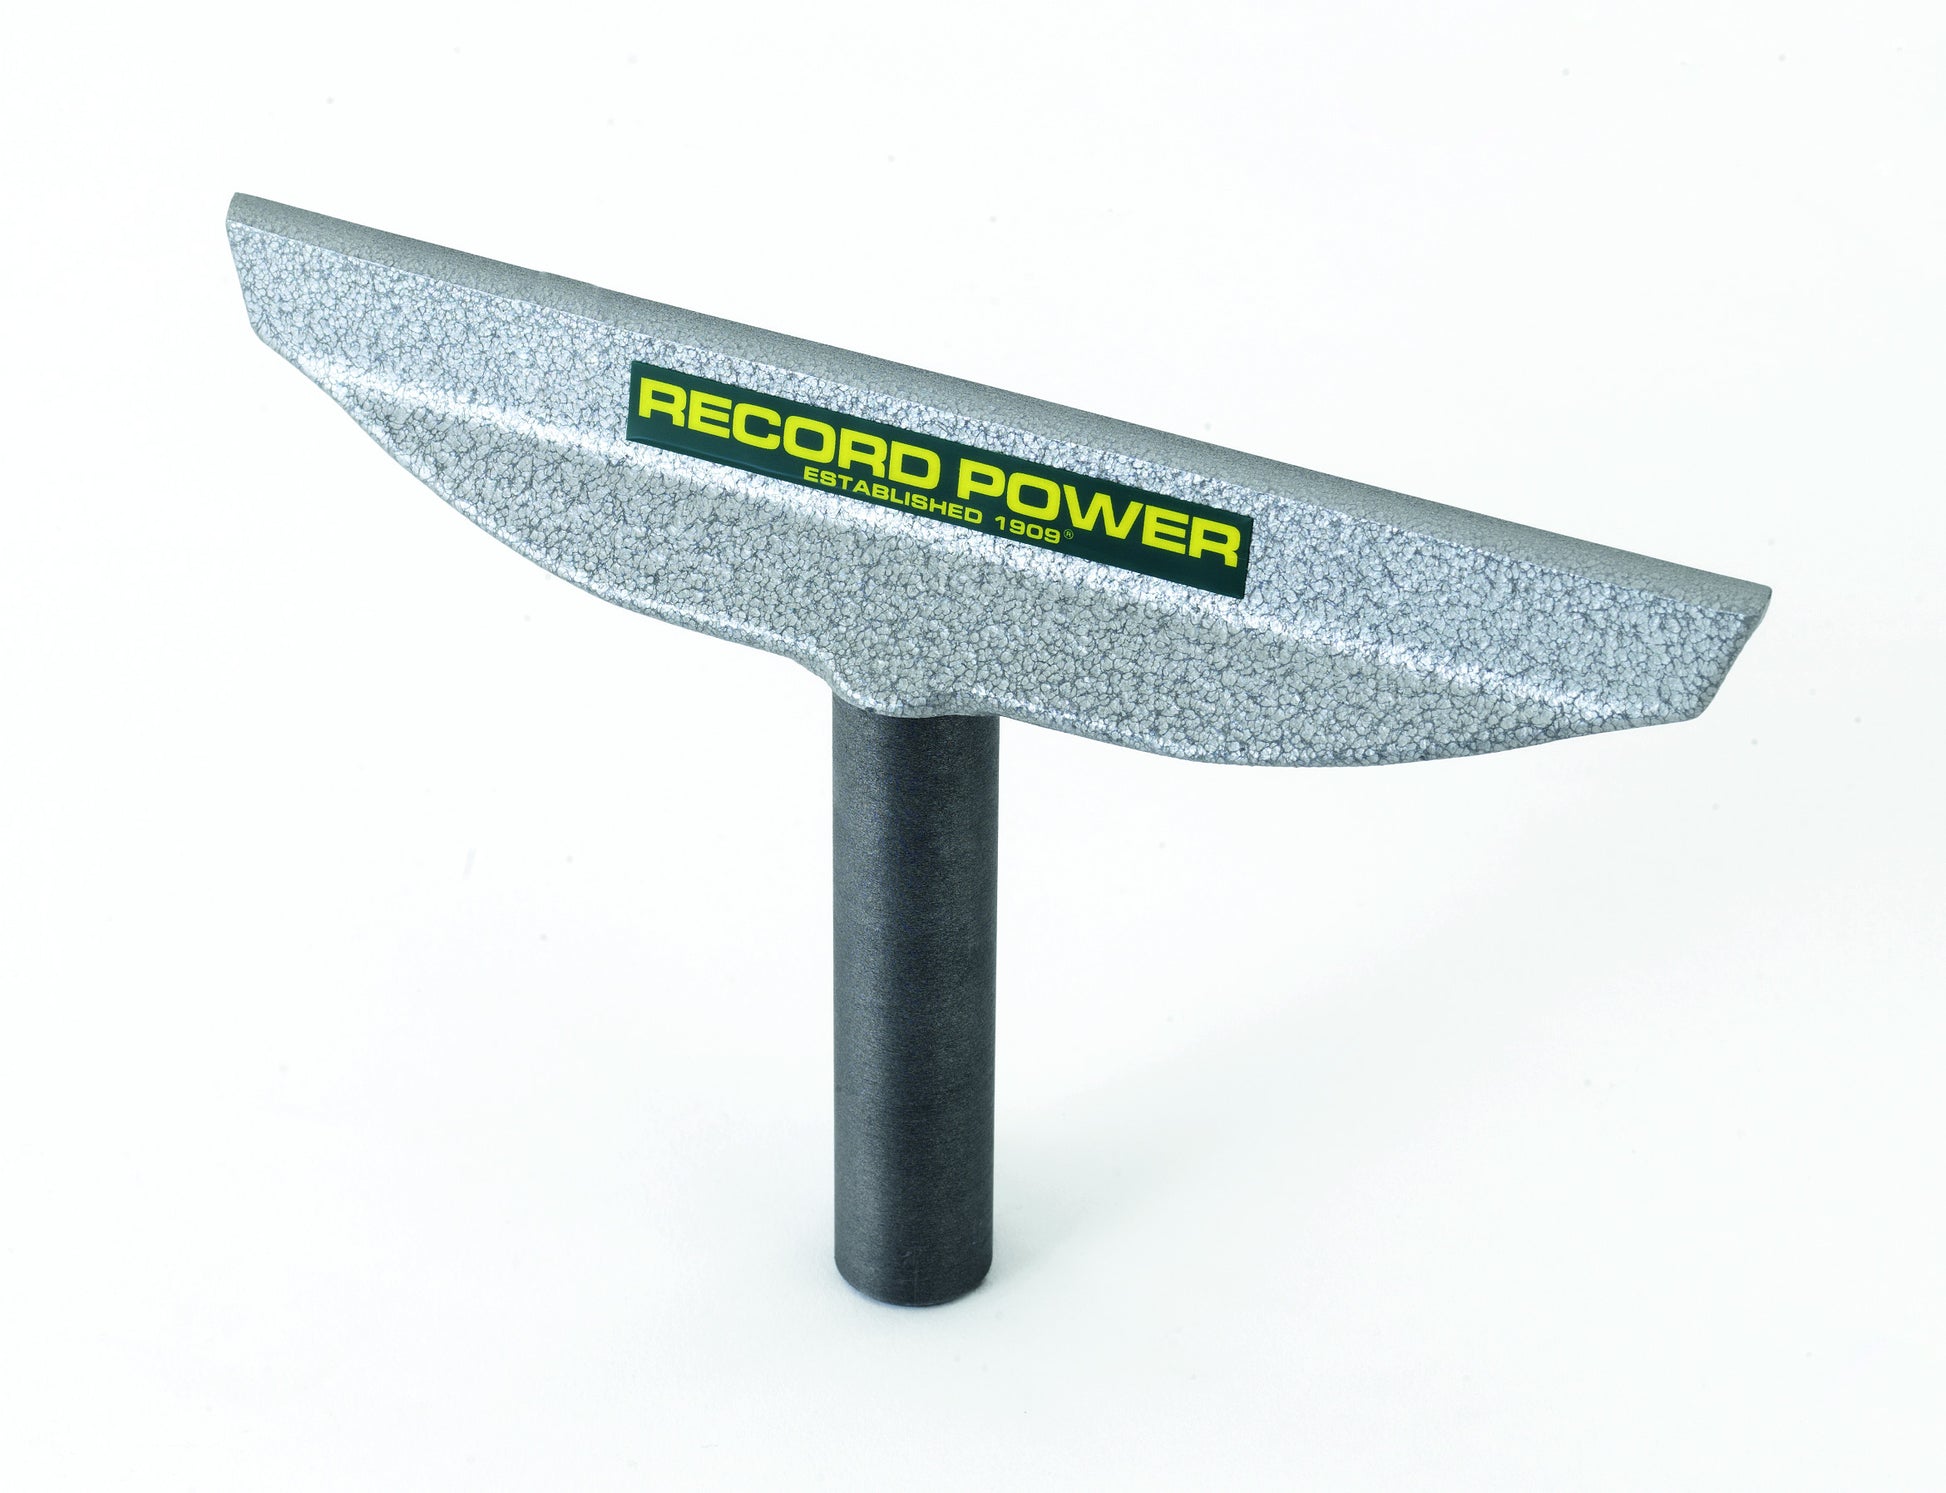 Record Power 10 inch tool rest